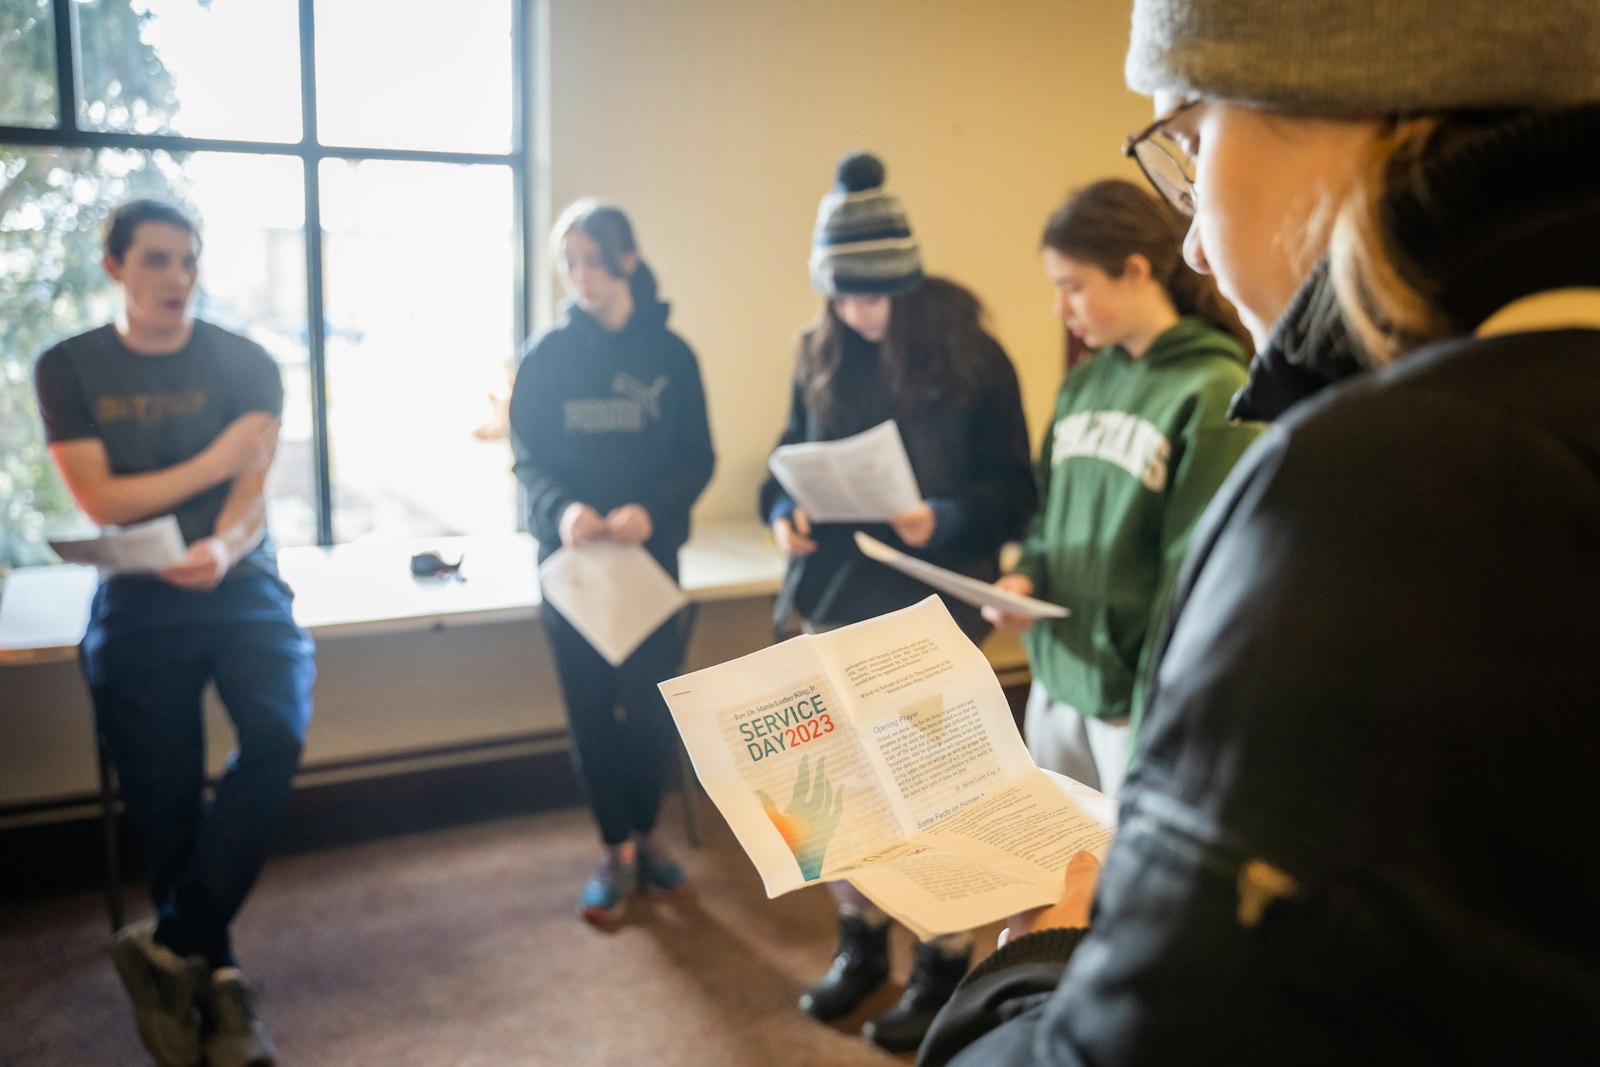 Teens from the National Shrine of the Little Flower Basilica took to the neighborhoods for their service project, collecting pantry items and coats for donation. Before going out into the neighborhood, the teens began the day with a prayer in honor of the Rev. King.